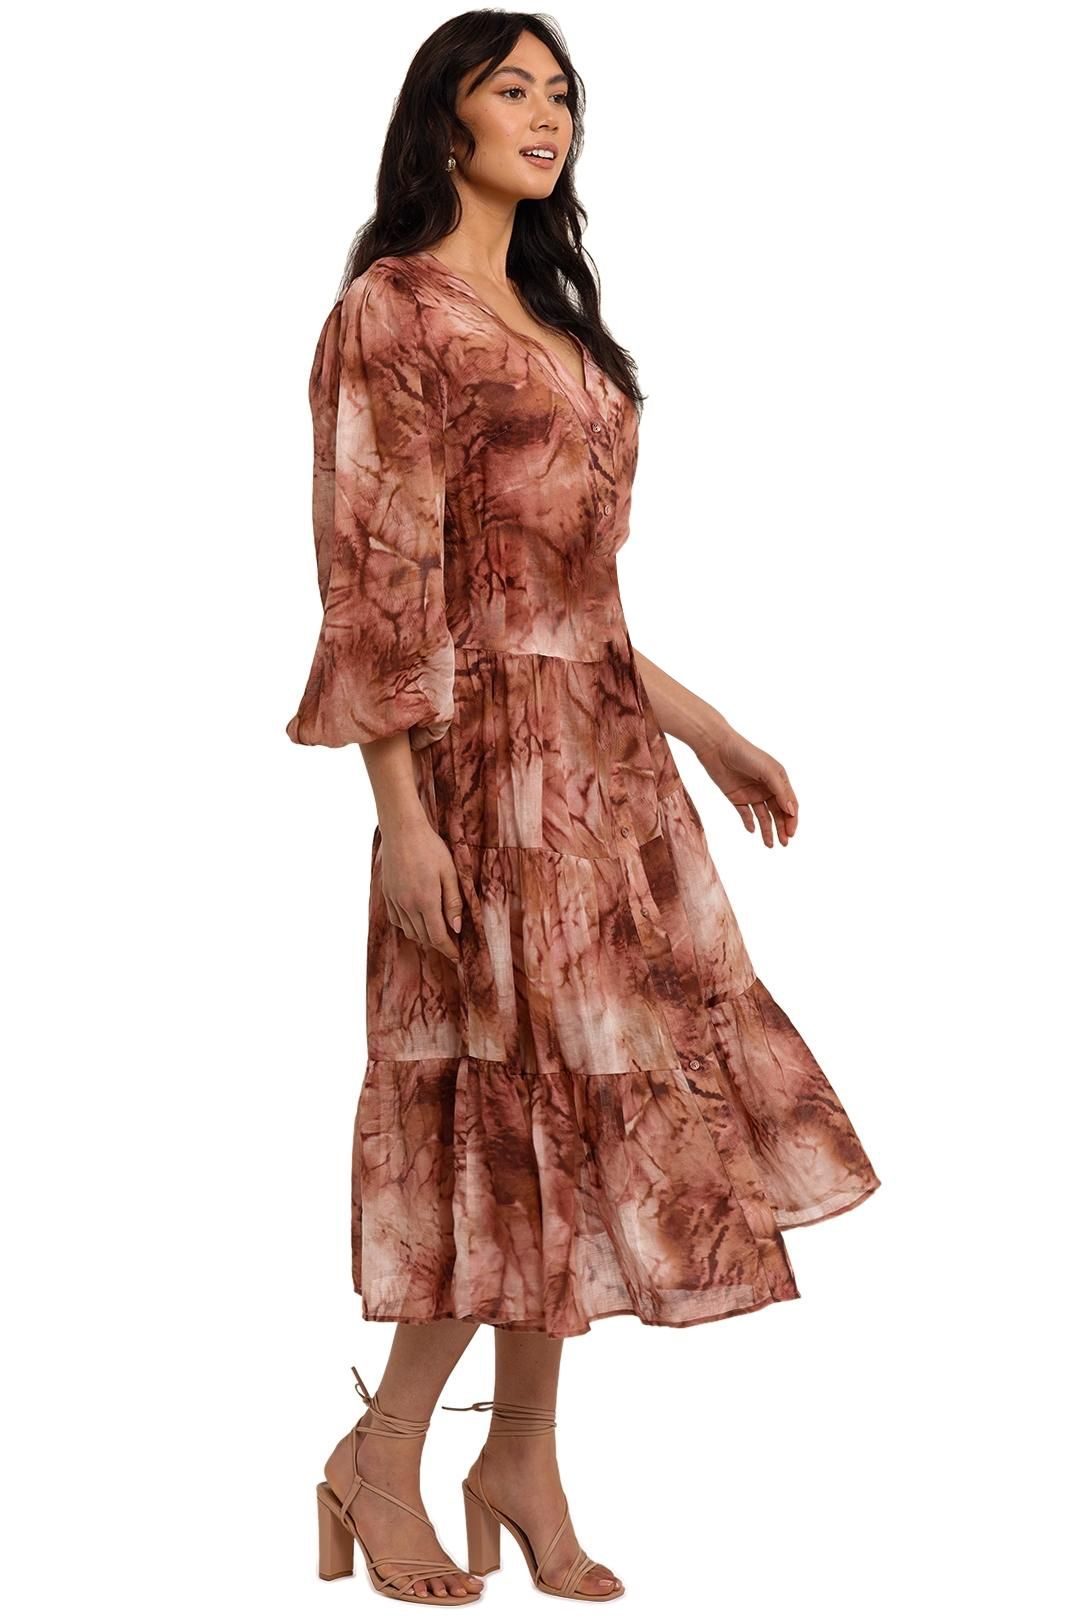 Ministry of Style Vacay Tie-Dye Midi Dress Tiered No Belt